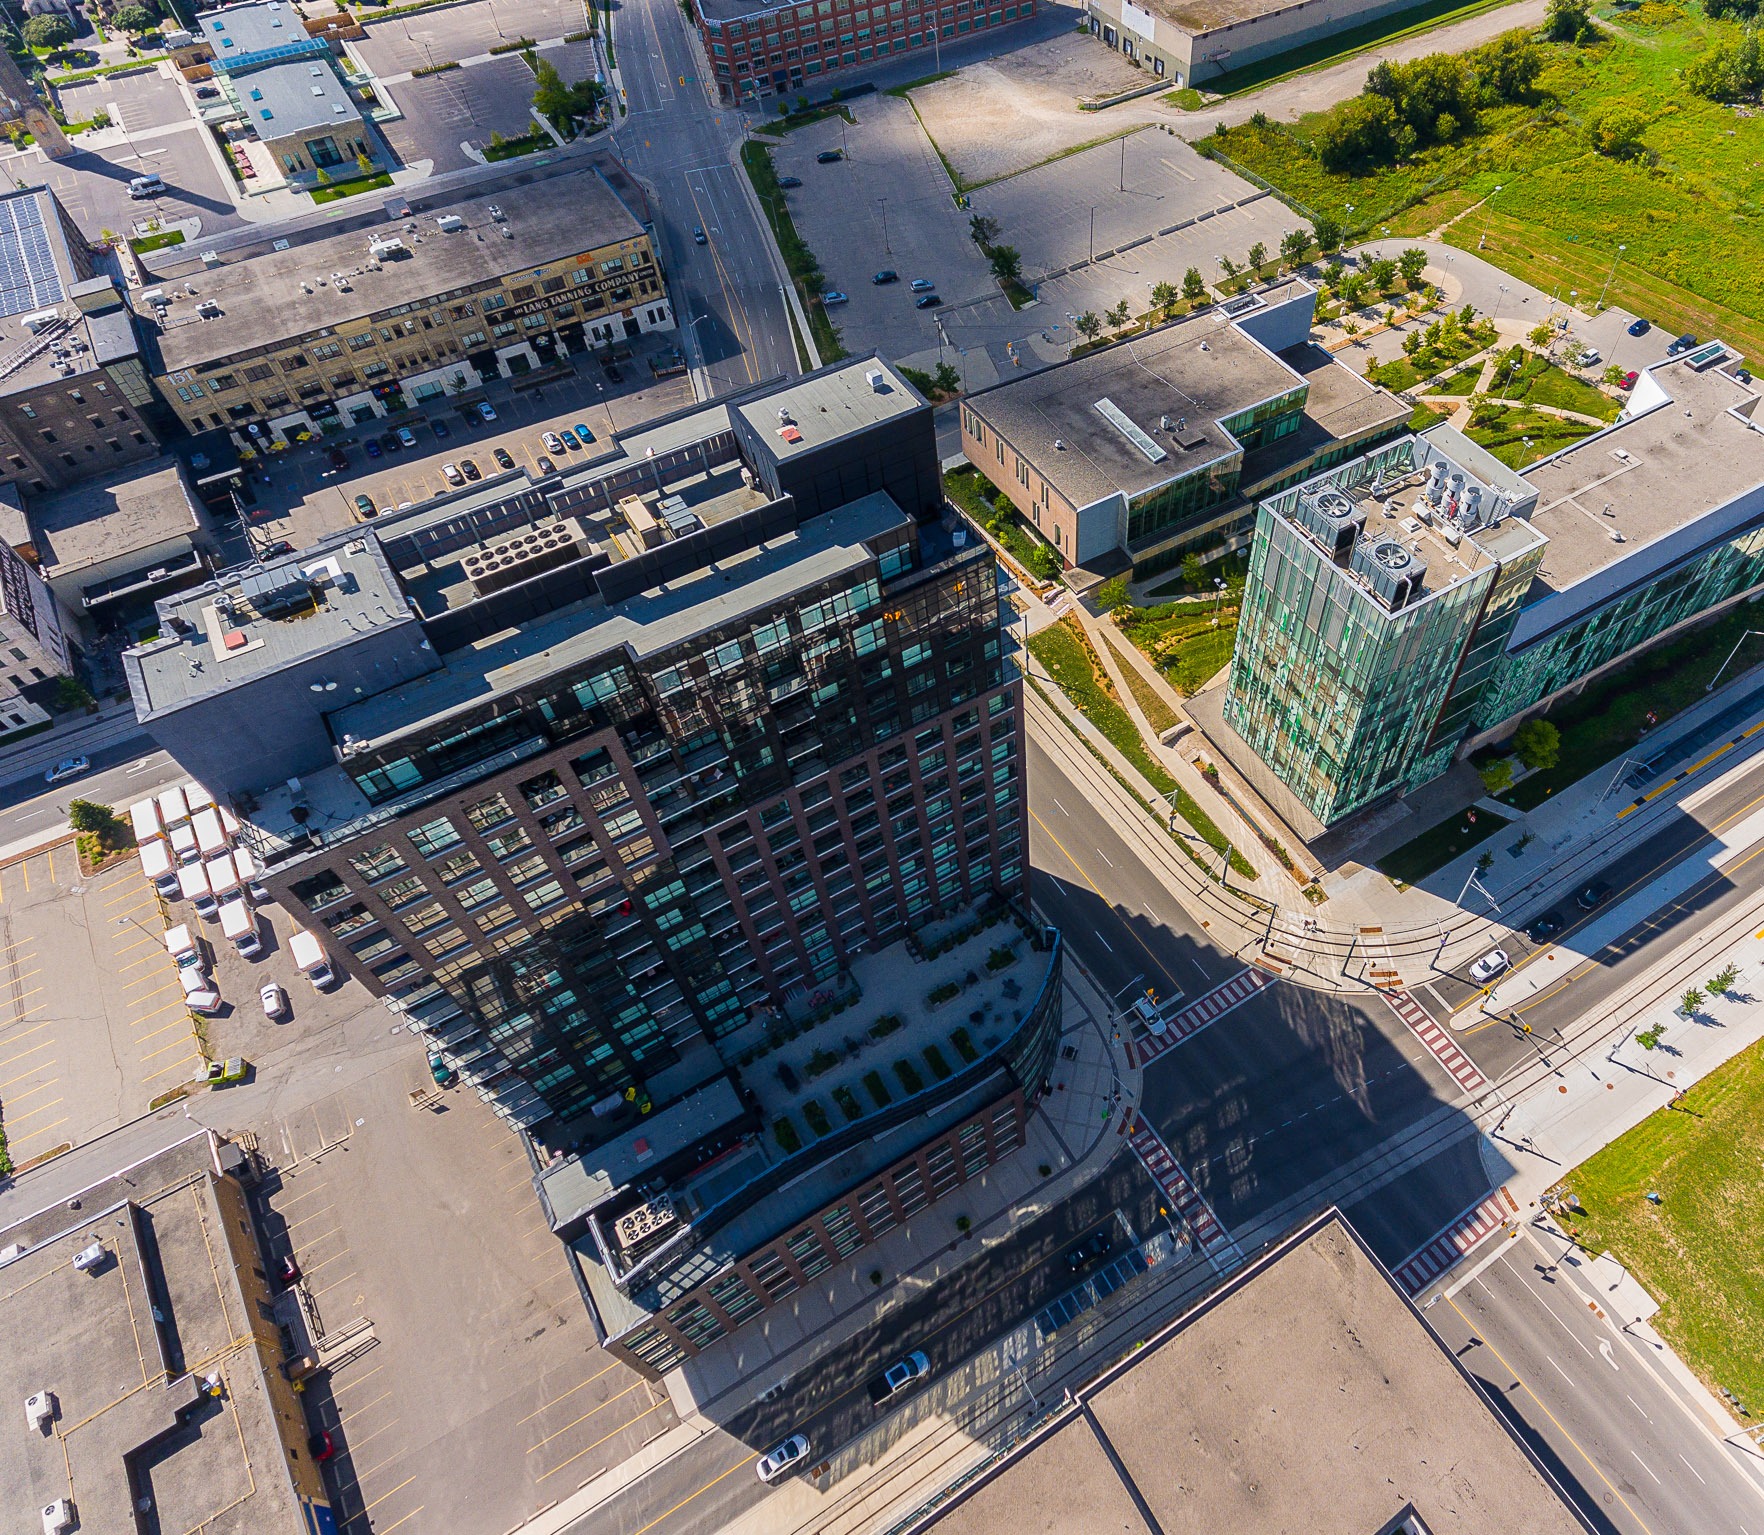 Aerial view of One Victoria Condos at the intersection of King Street and Victoria Street with Communitech and University of Waterloo pharmacy building in view. The rooftop amenity for the condo tower is in view.